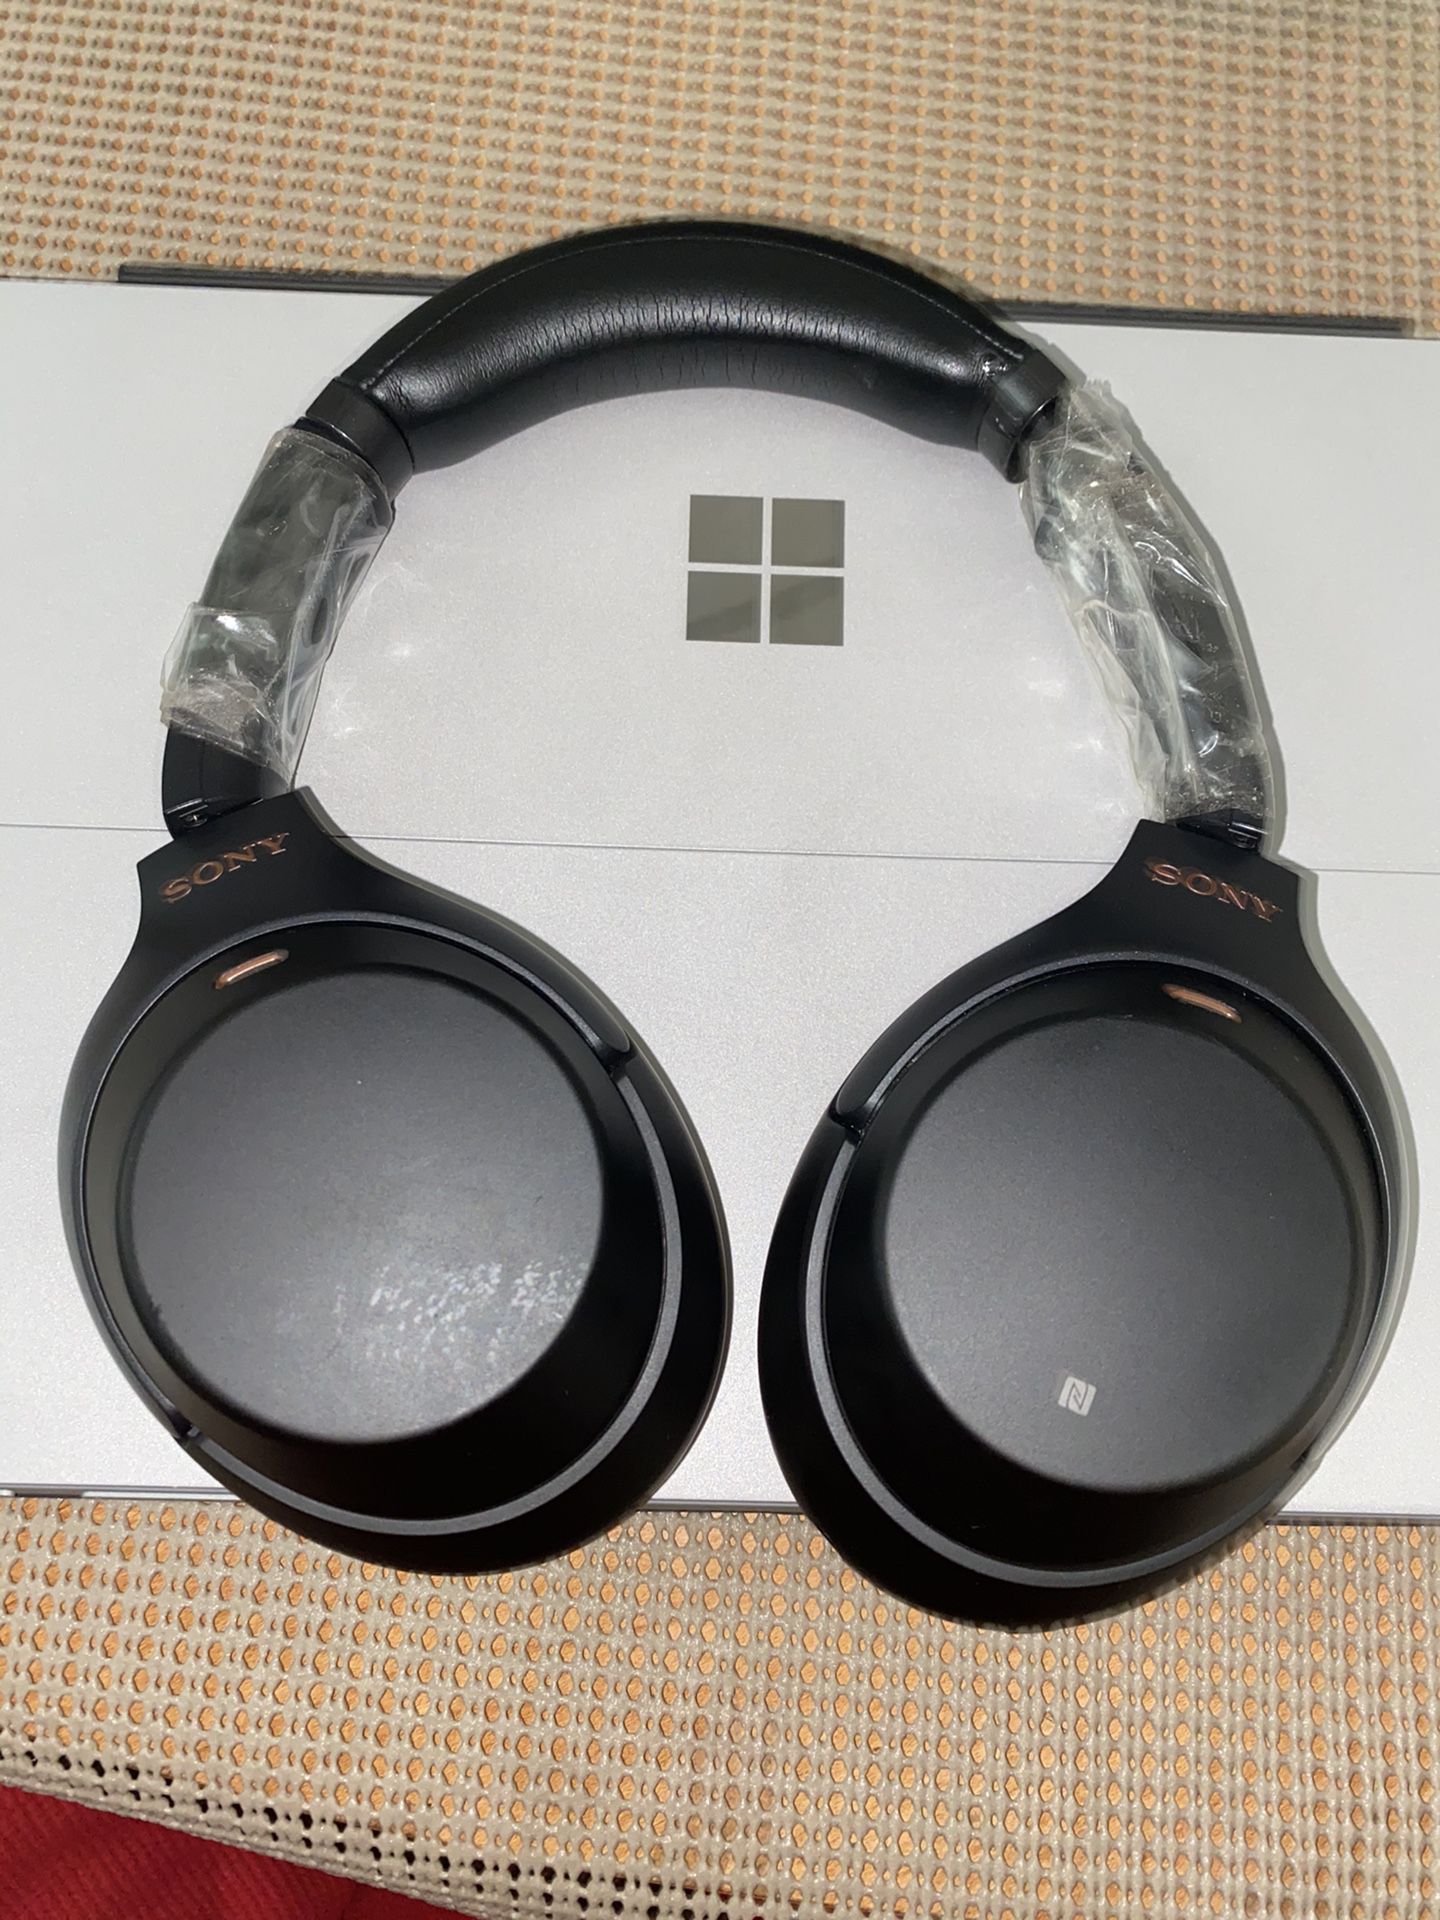 Used Sony Wireless Noise-Cancelling Over-the-Ear Headphones